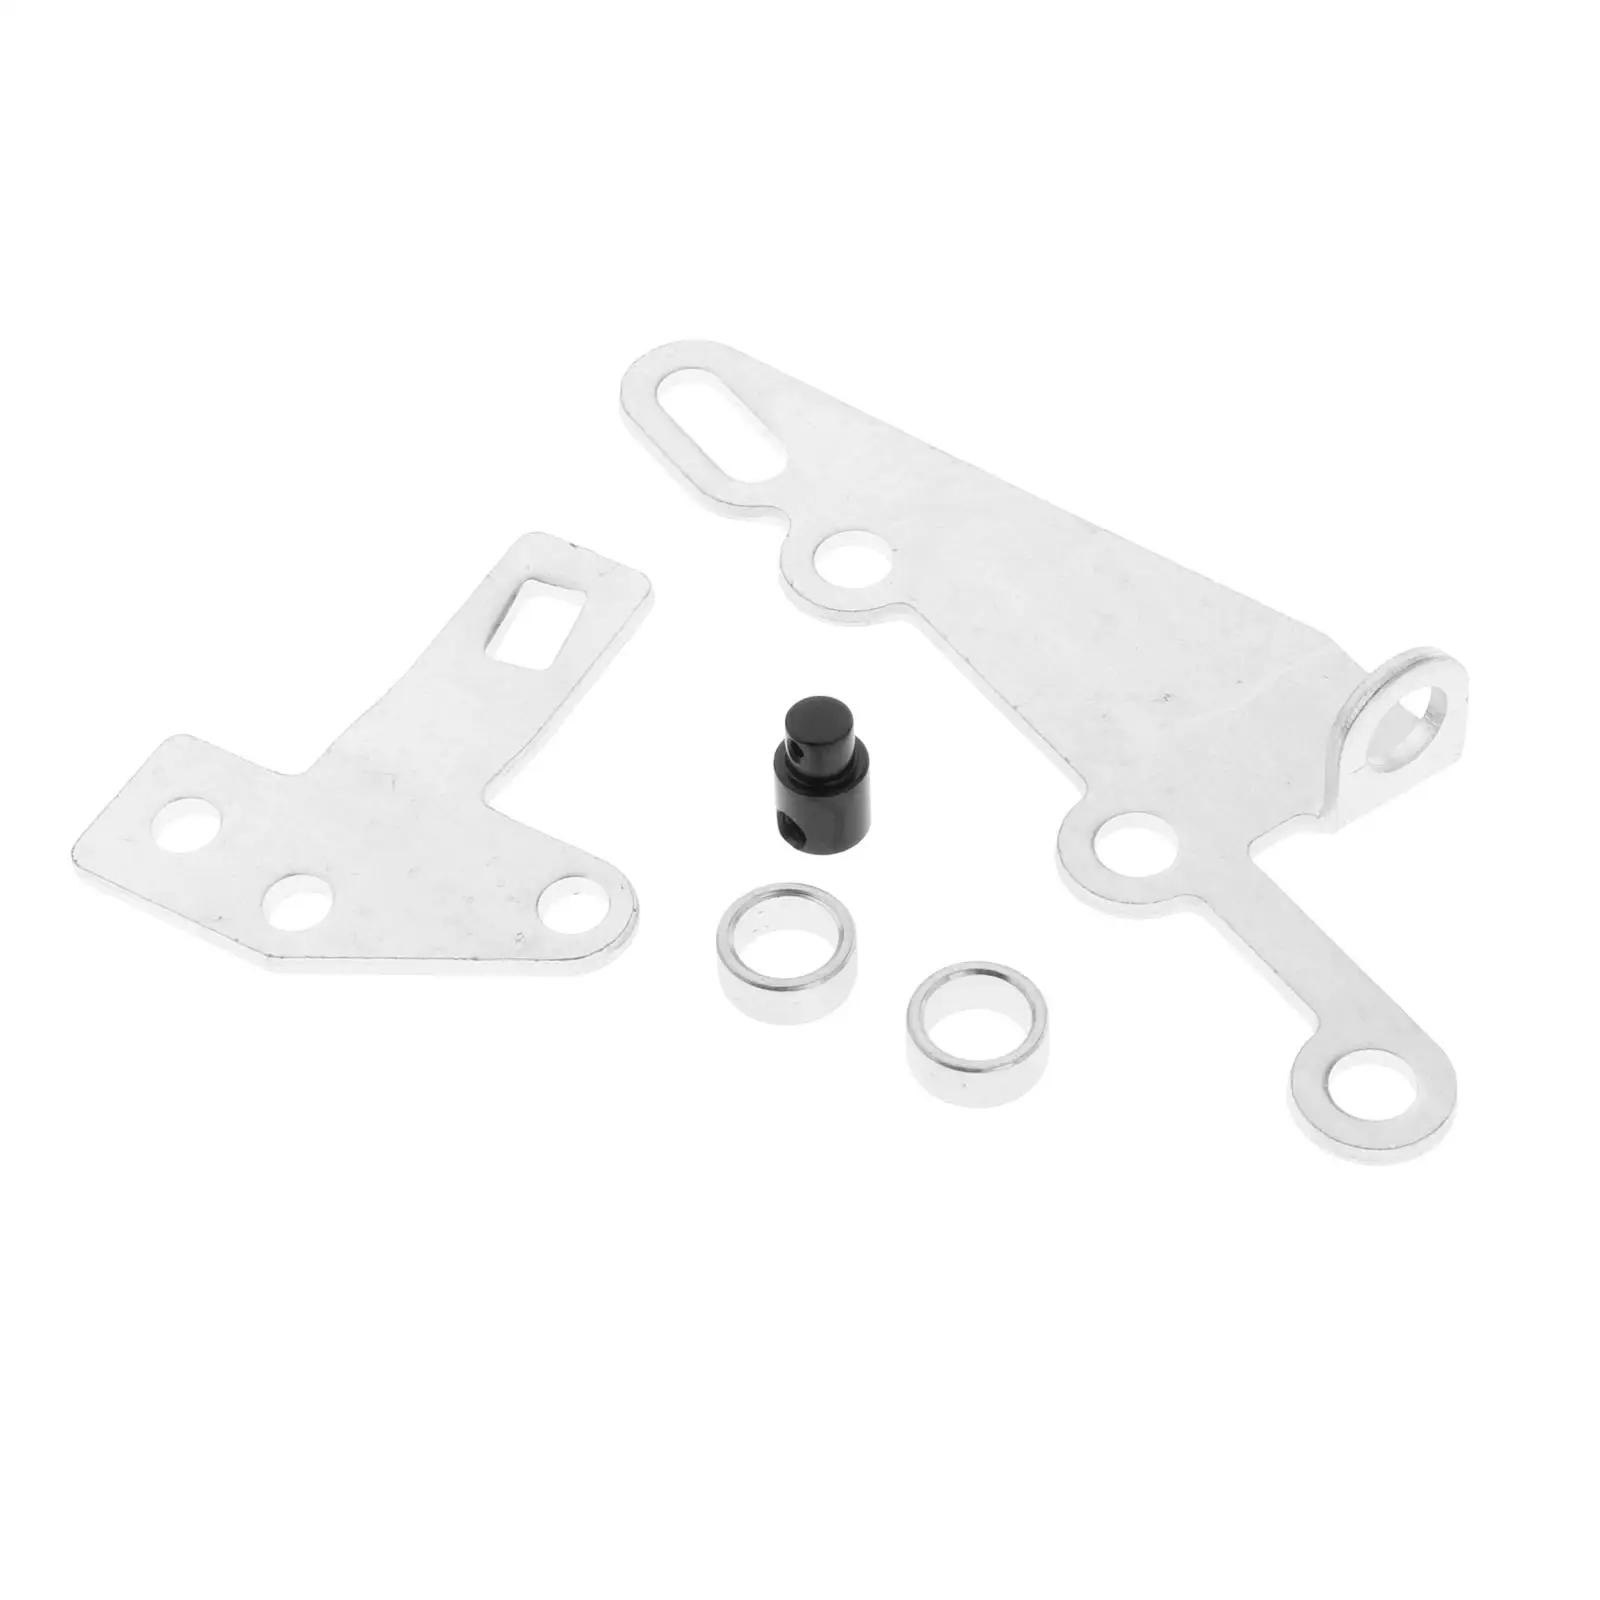 35498 Bracket & Lever Kit Replacements Fits for Turbo TH400 TH350 TH250 700R4 Automatic Transmissions